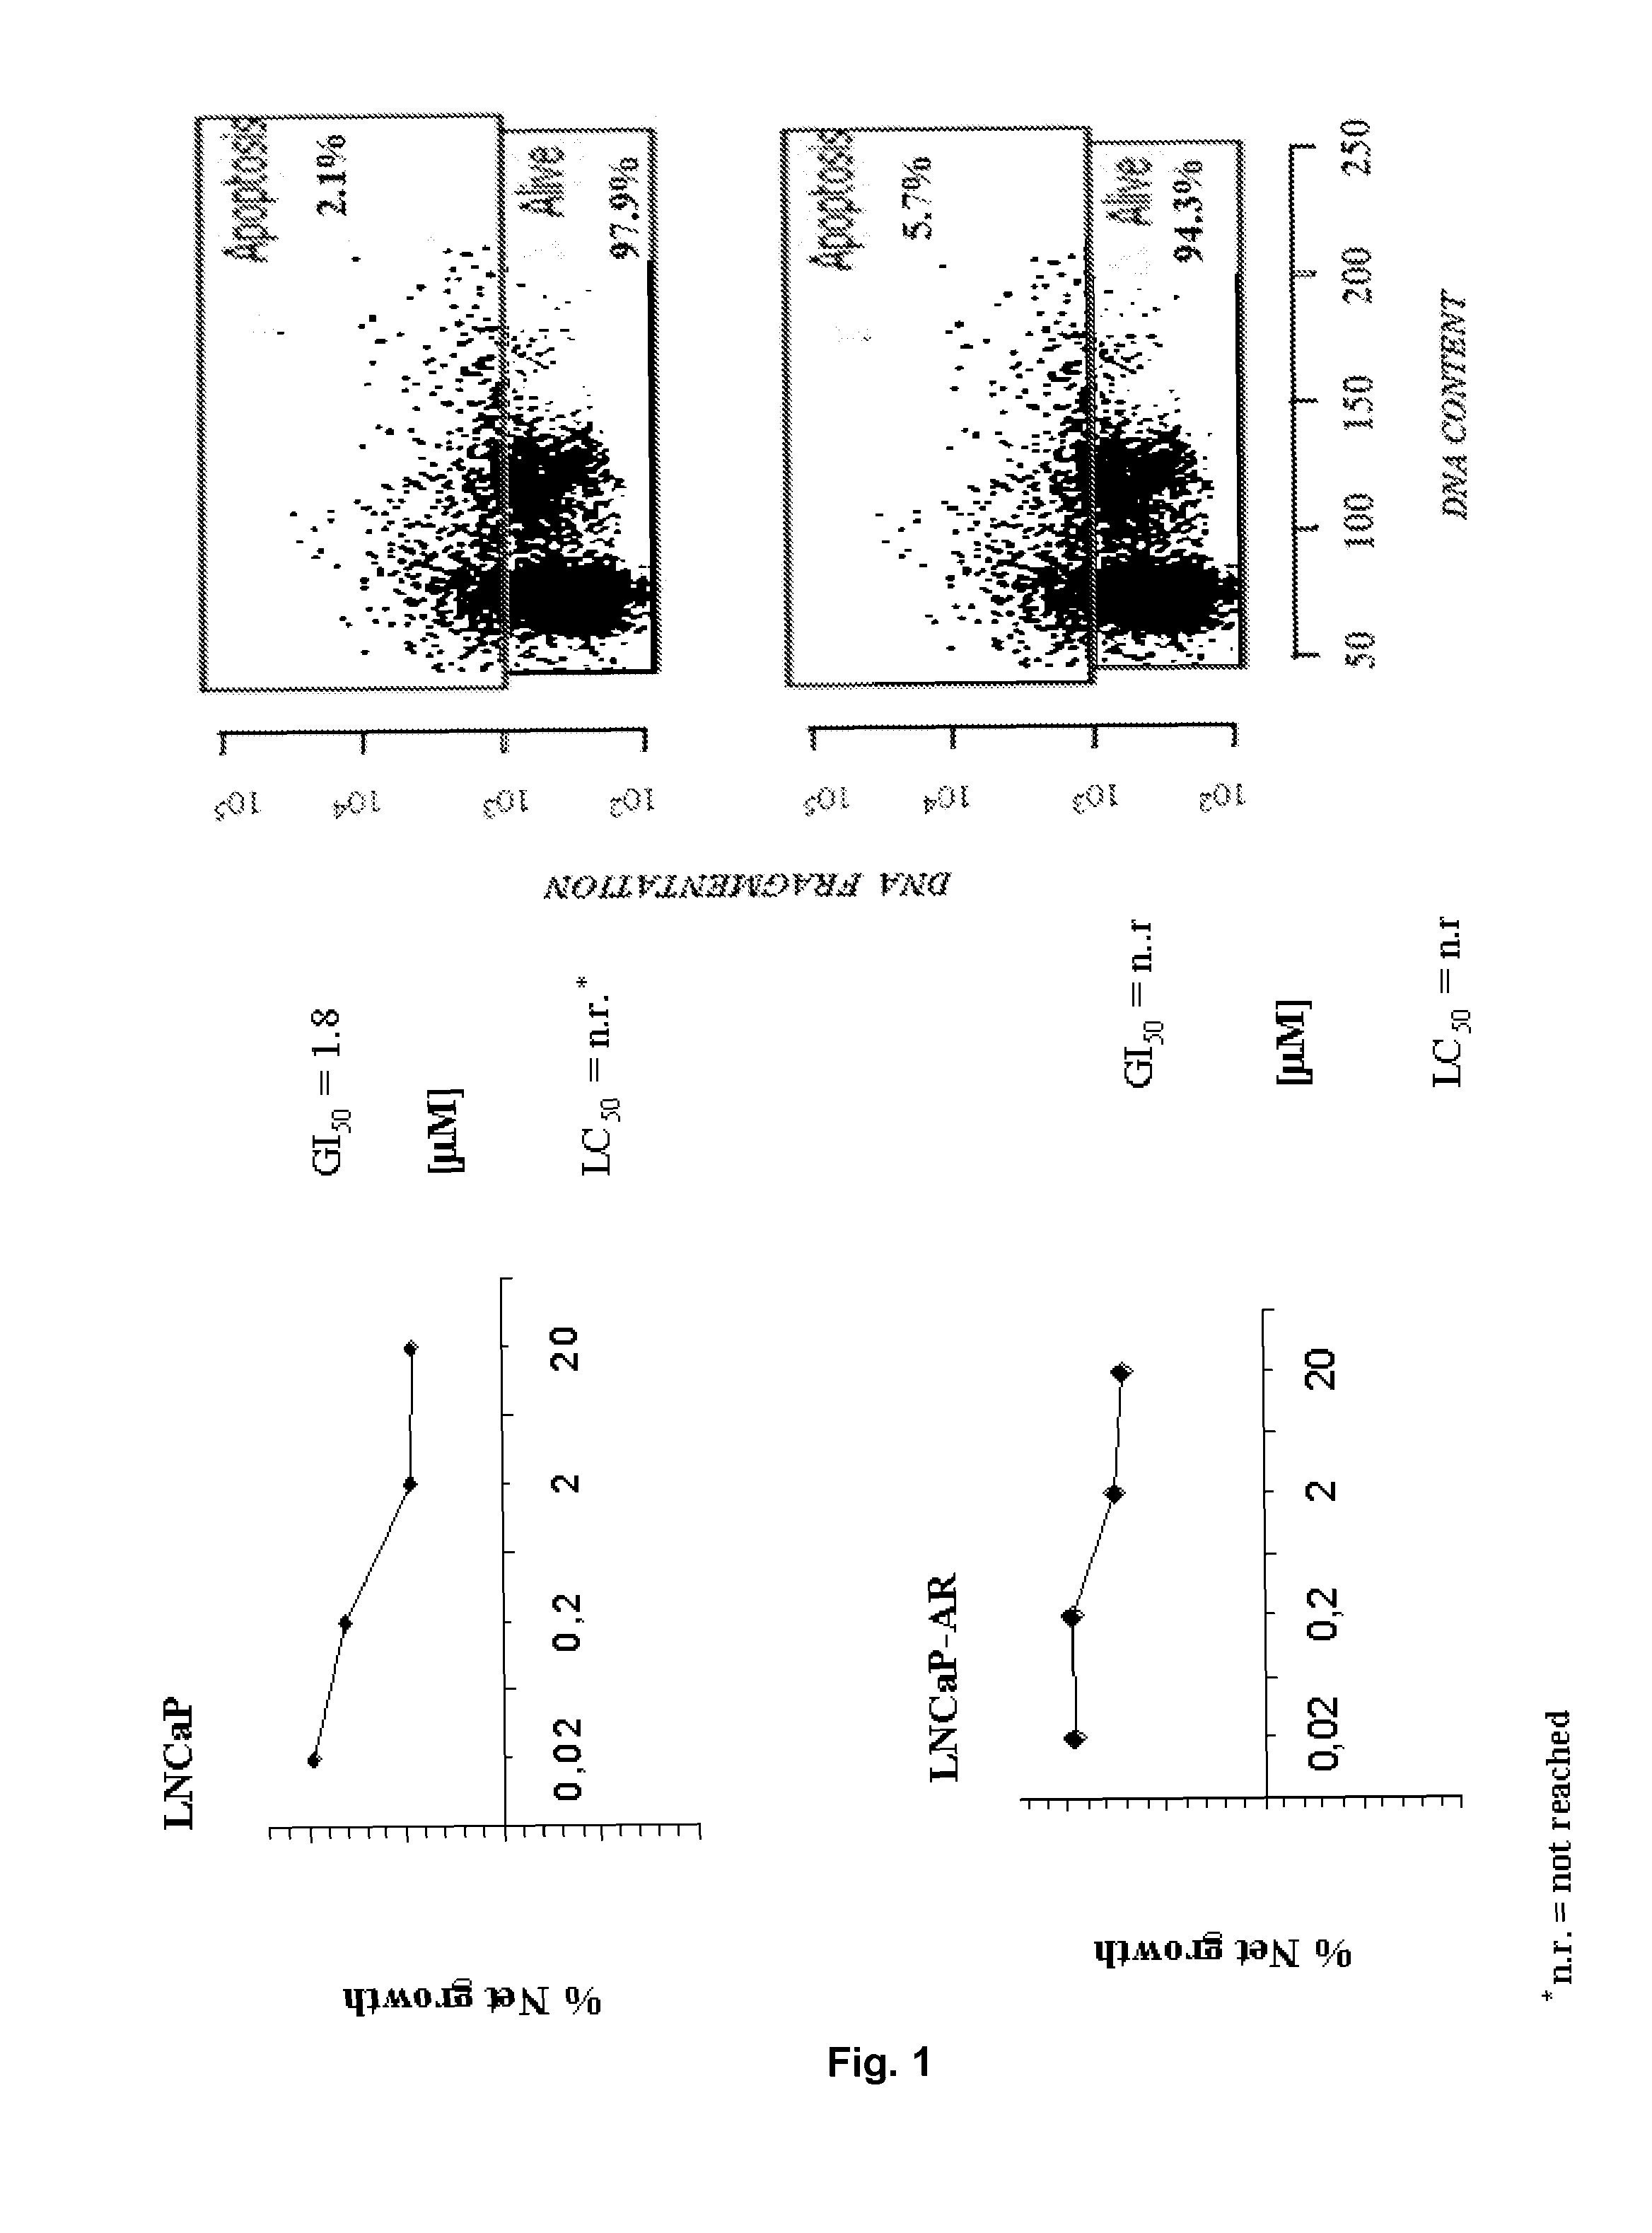 Non-steroidal compounds for androgen receptor modulation